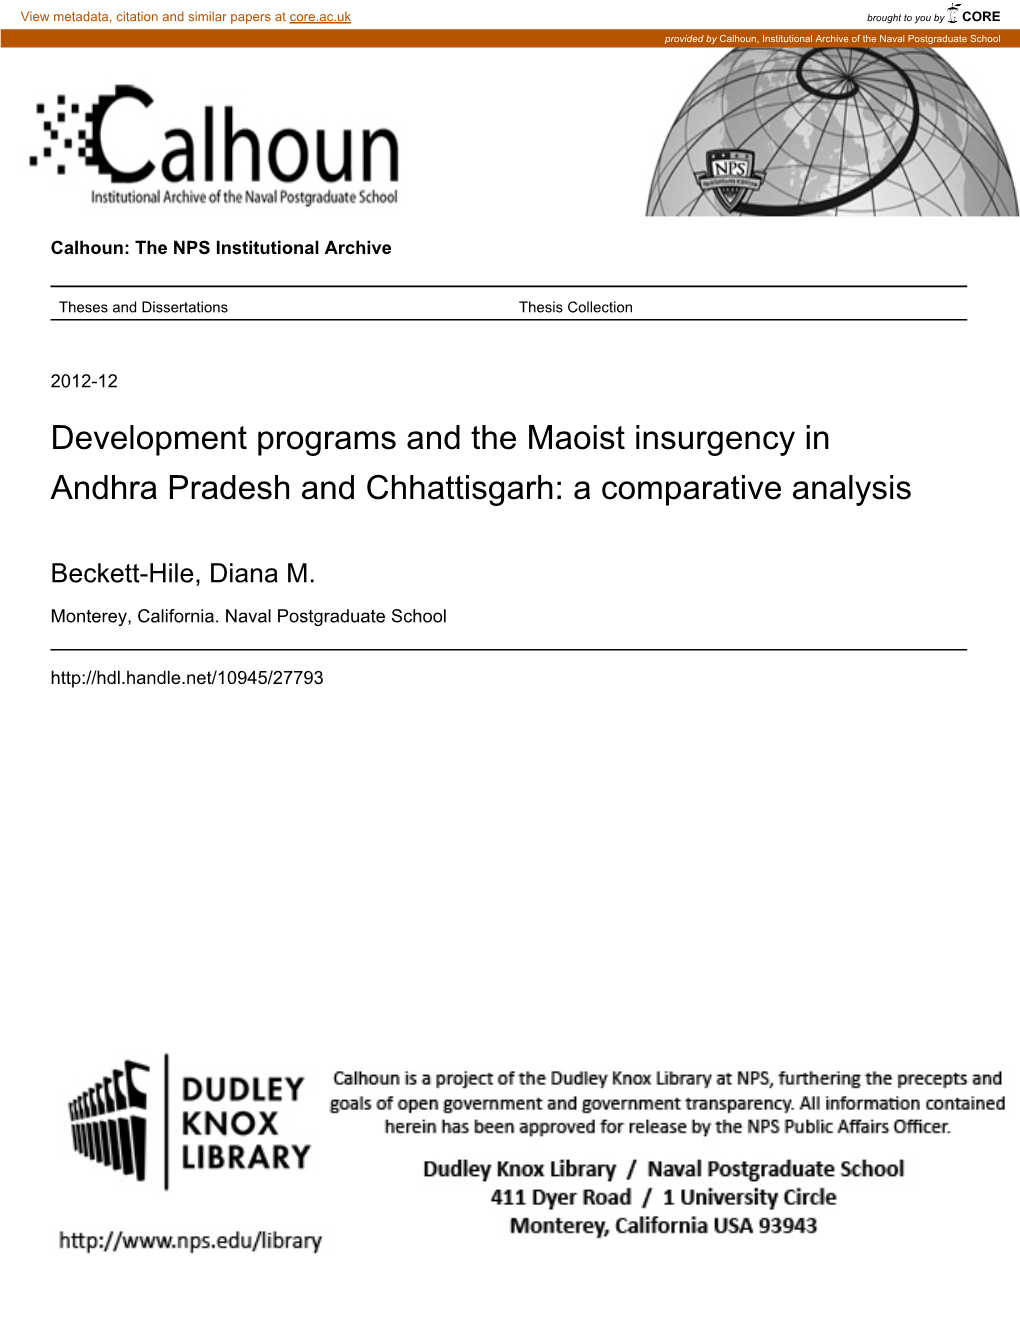 Development Programs and the Maoist Insurgency in Andhra Pradesh and Chhattisgarh: a Comparative Analysis